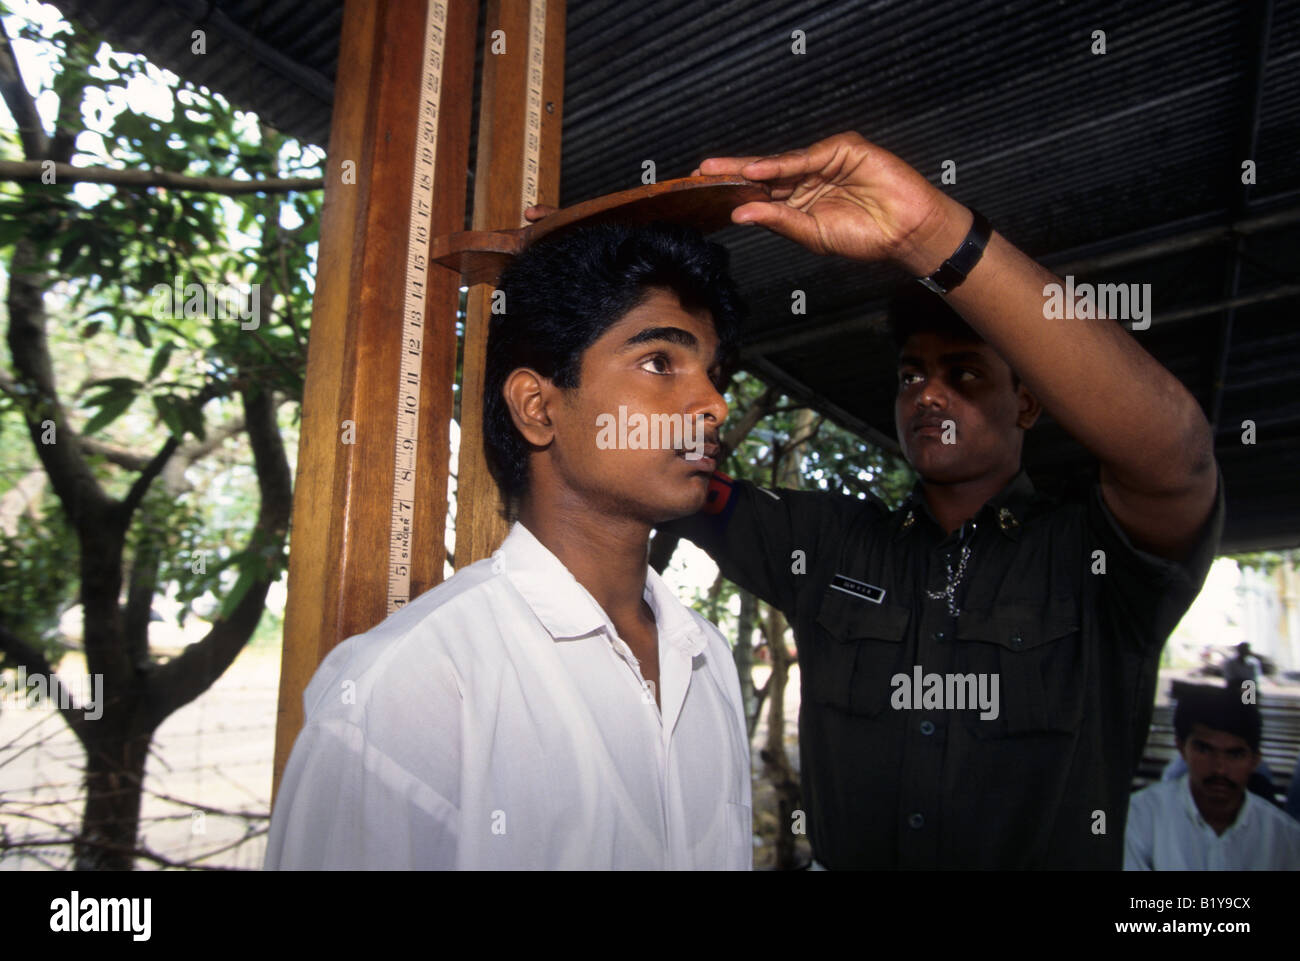 A recruit has his height measured by a Sri Lankan Army officer in Colombo Sri Lanka Stock Photo